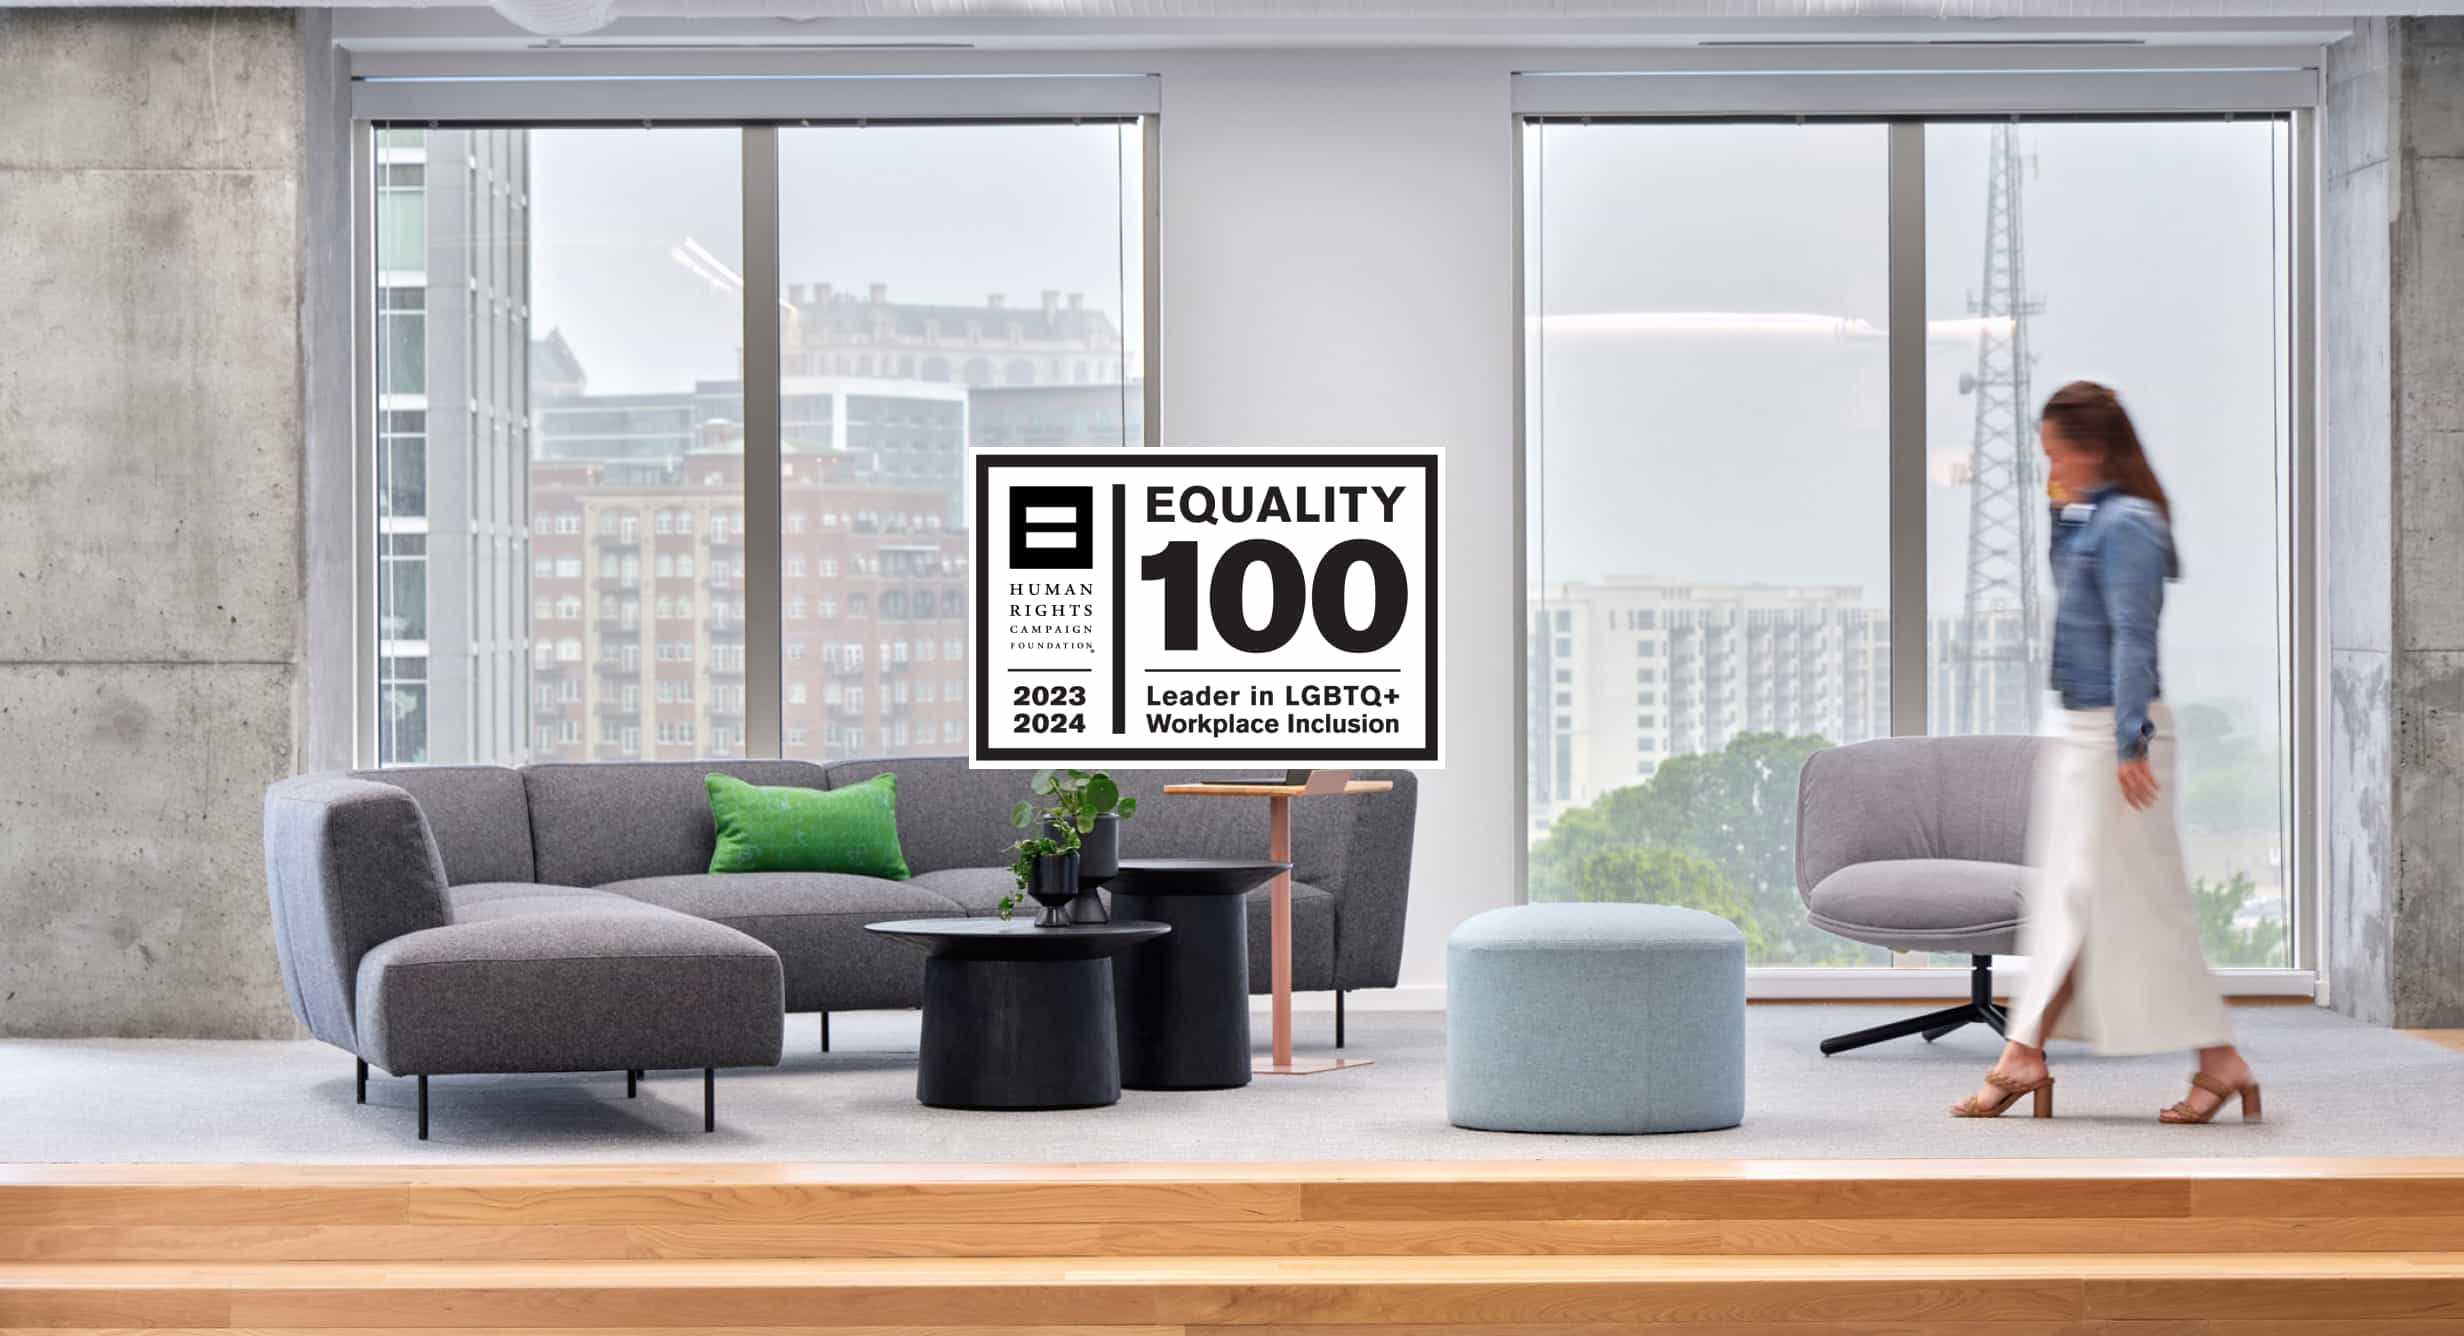 HKS Honored as a Leader in LGBTQ+ Workplace Inclusion with Equality 100 Award